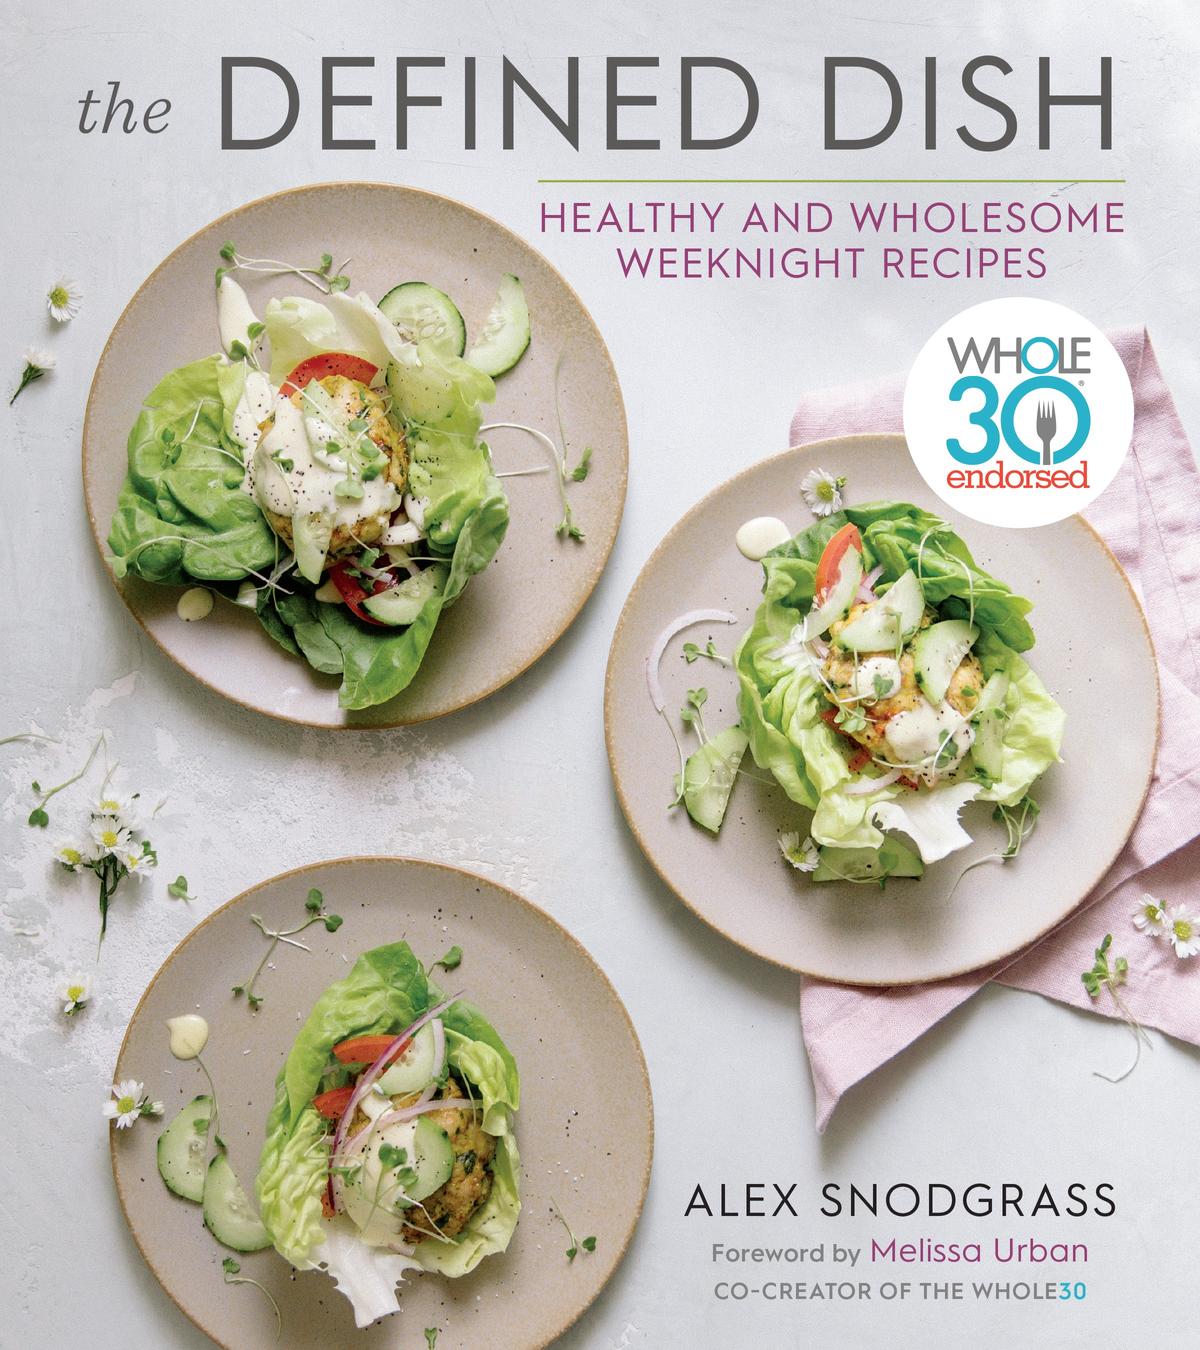 "The Defined Dish: Healthy and Wholesome Weeknight Recipes" by Alex Snodgrass (Houghton Mifflin Harcourt, $30).